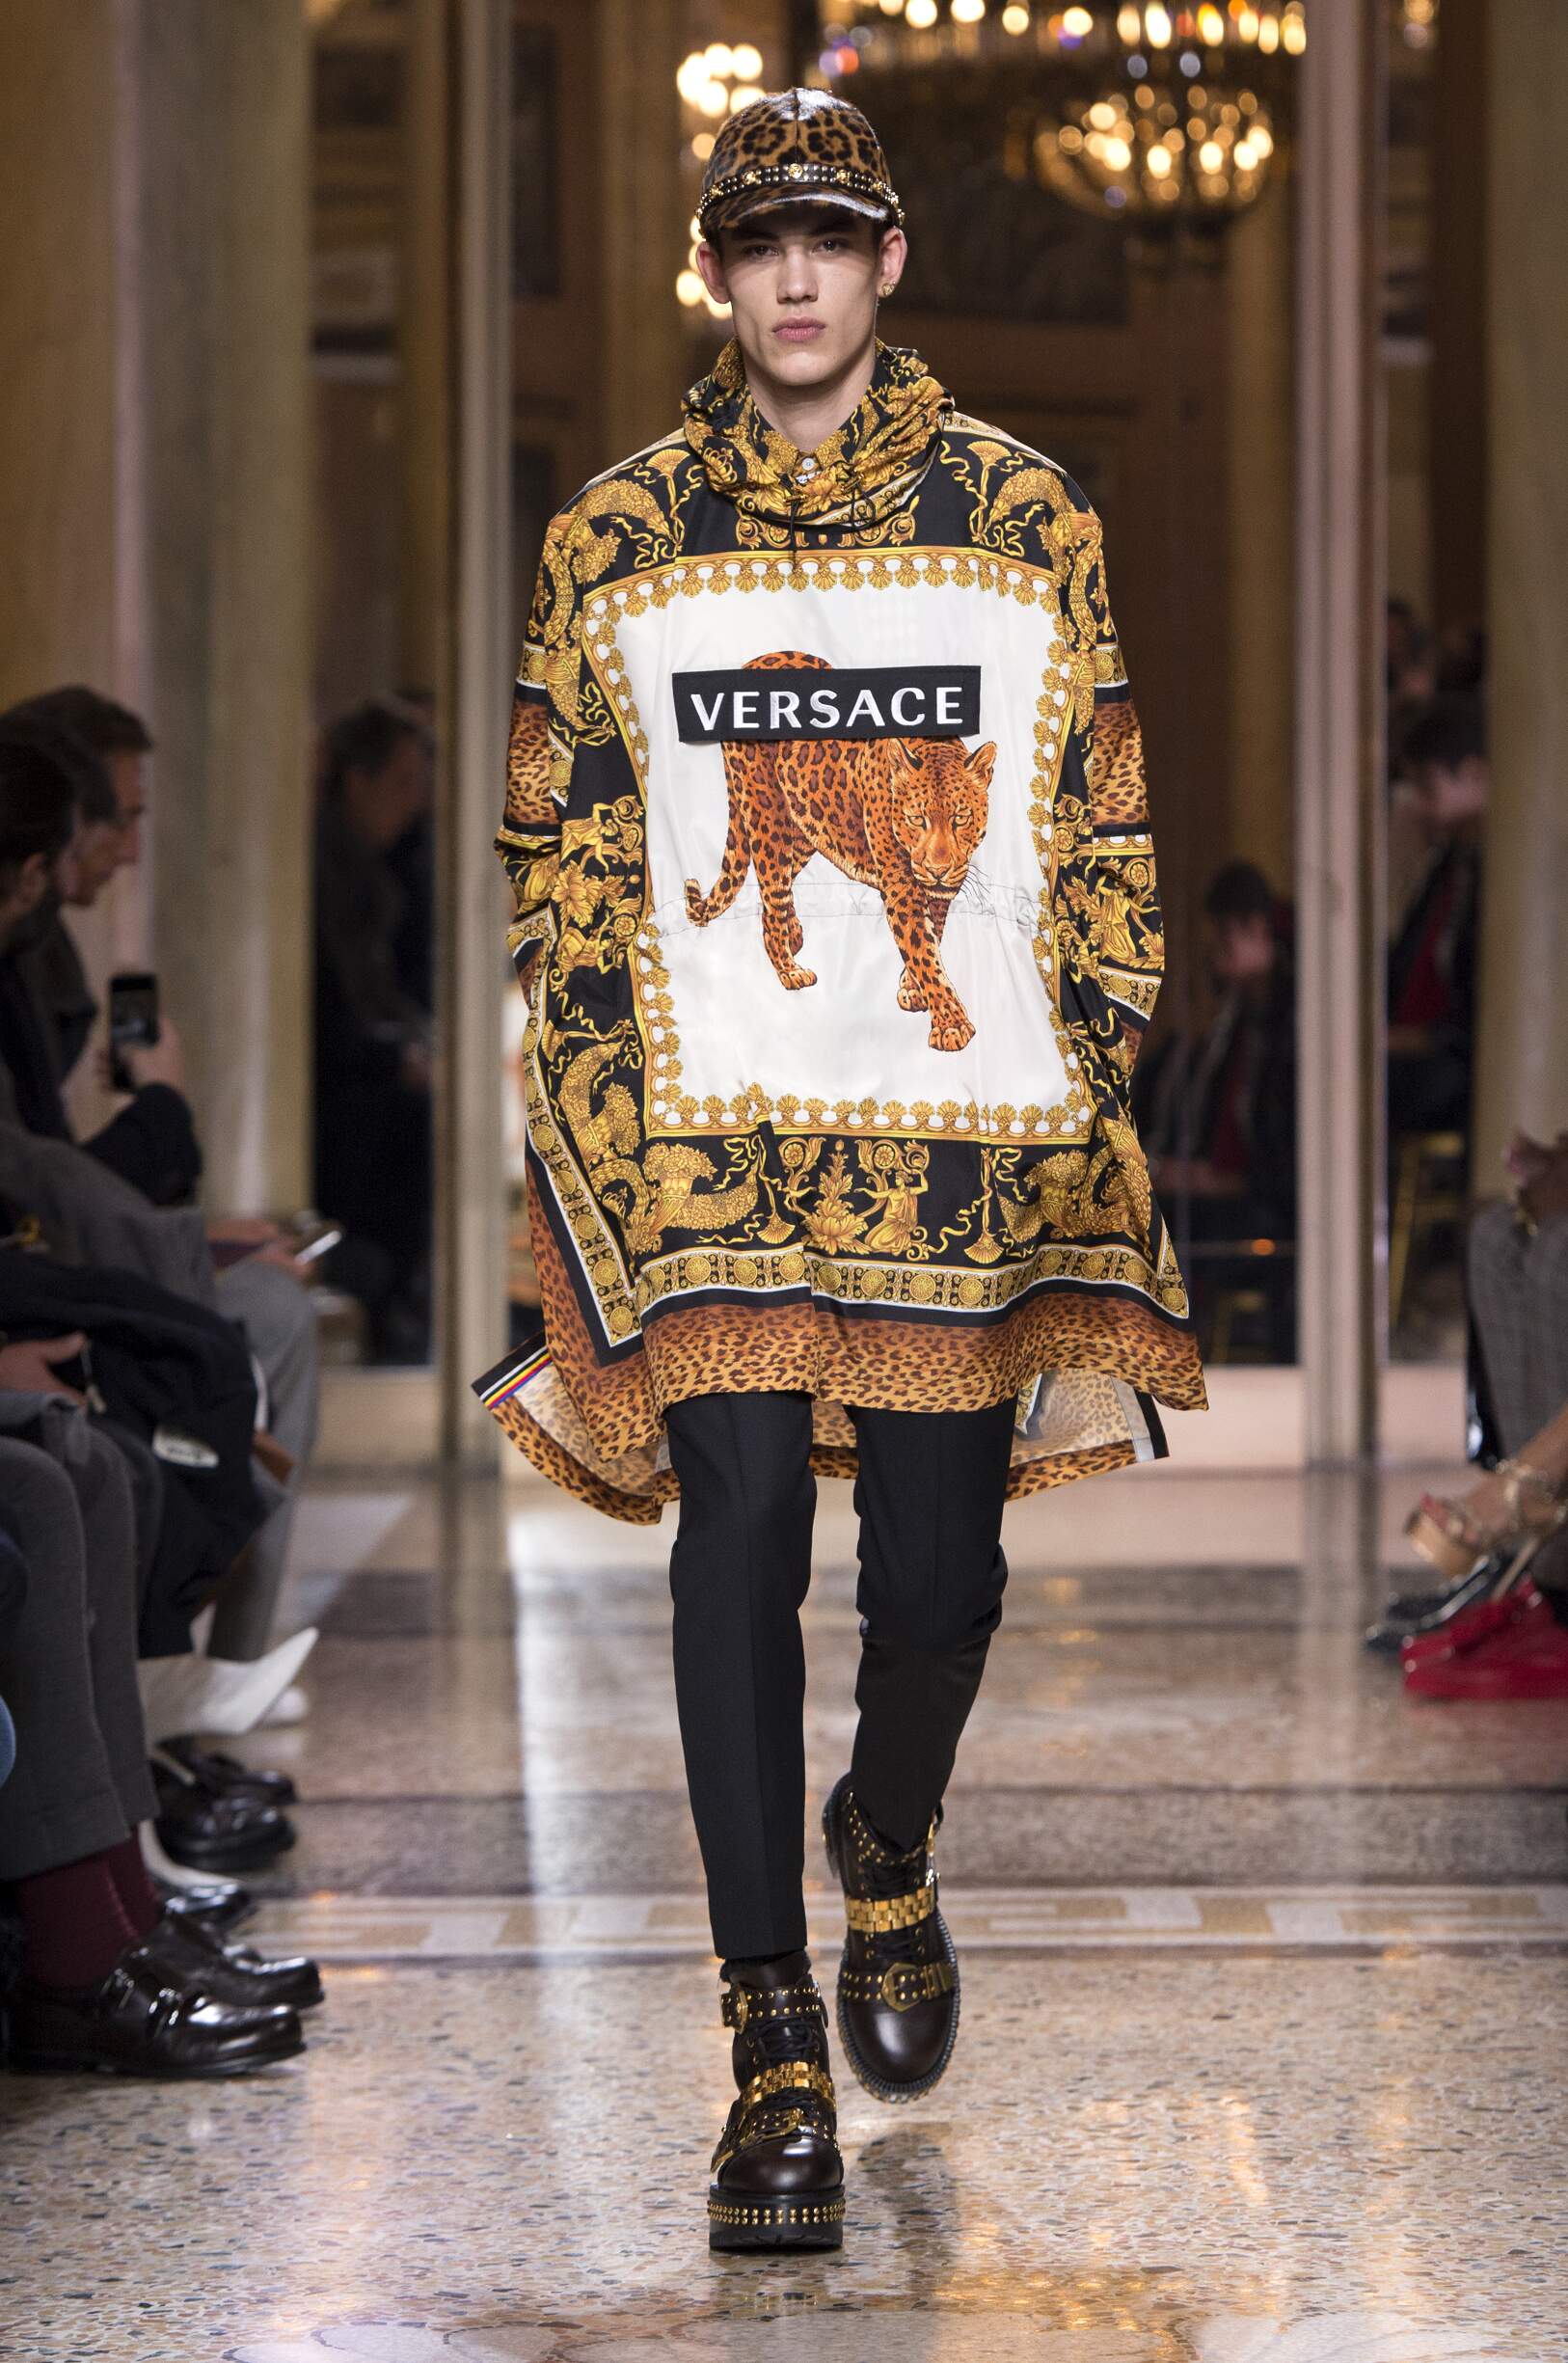 VERSACE FALL WINTER 2018 MEN'S COLLECTION